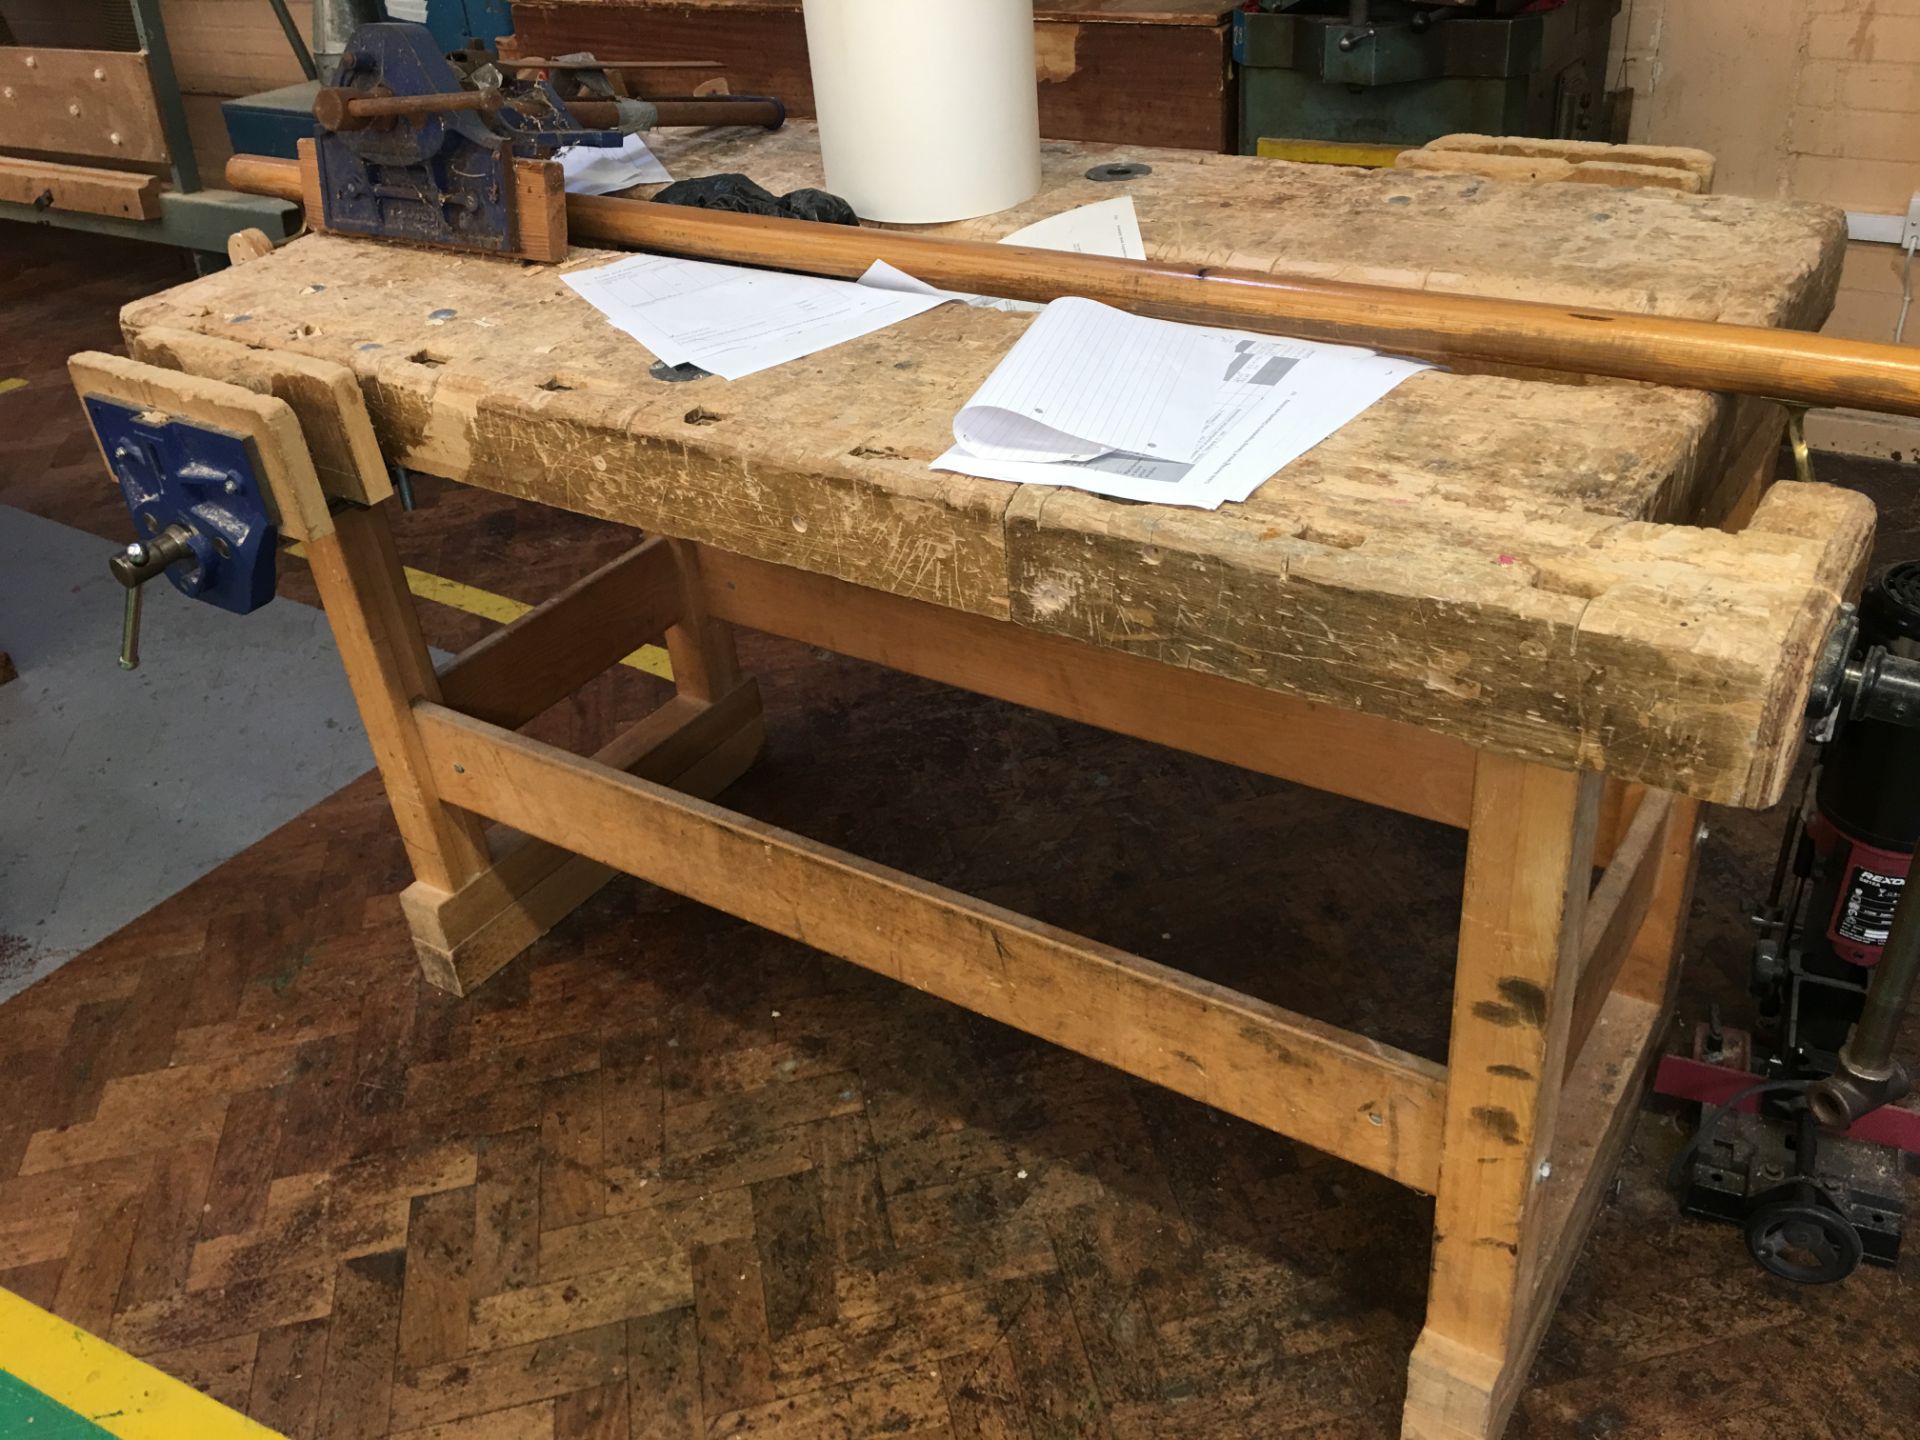 Wooden Work Bench With Vices